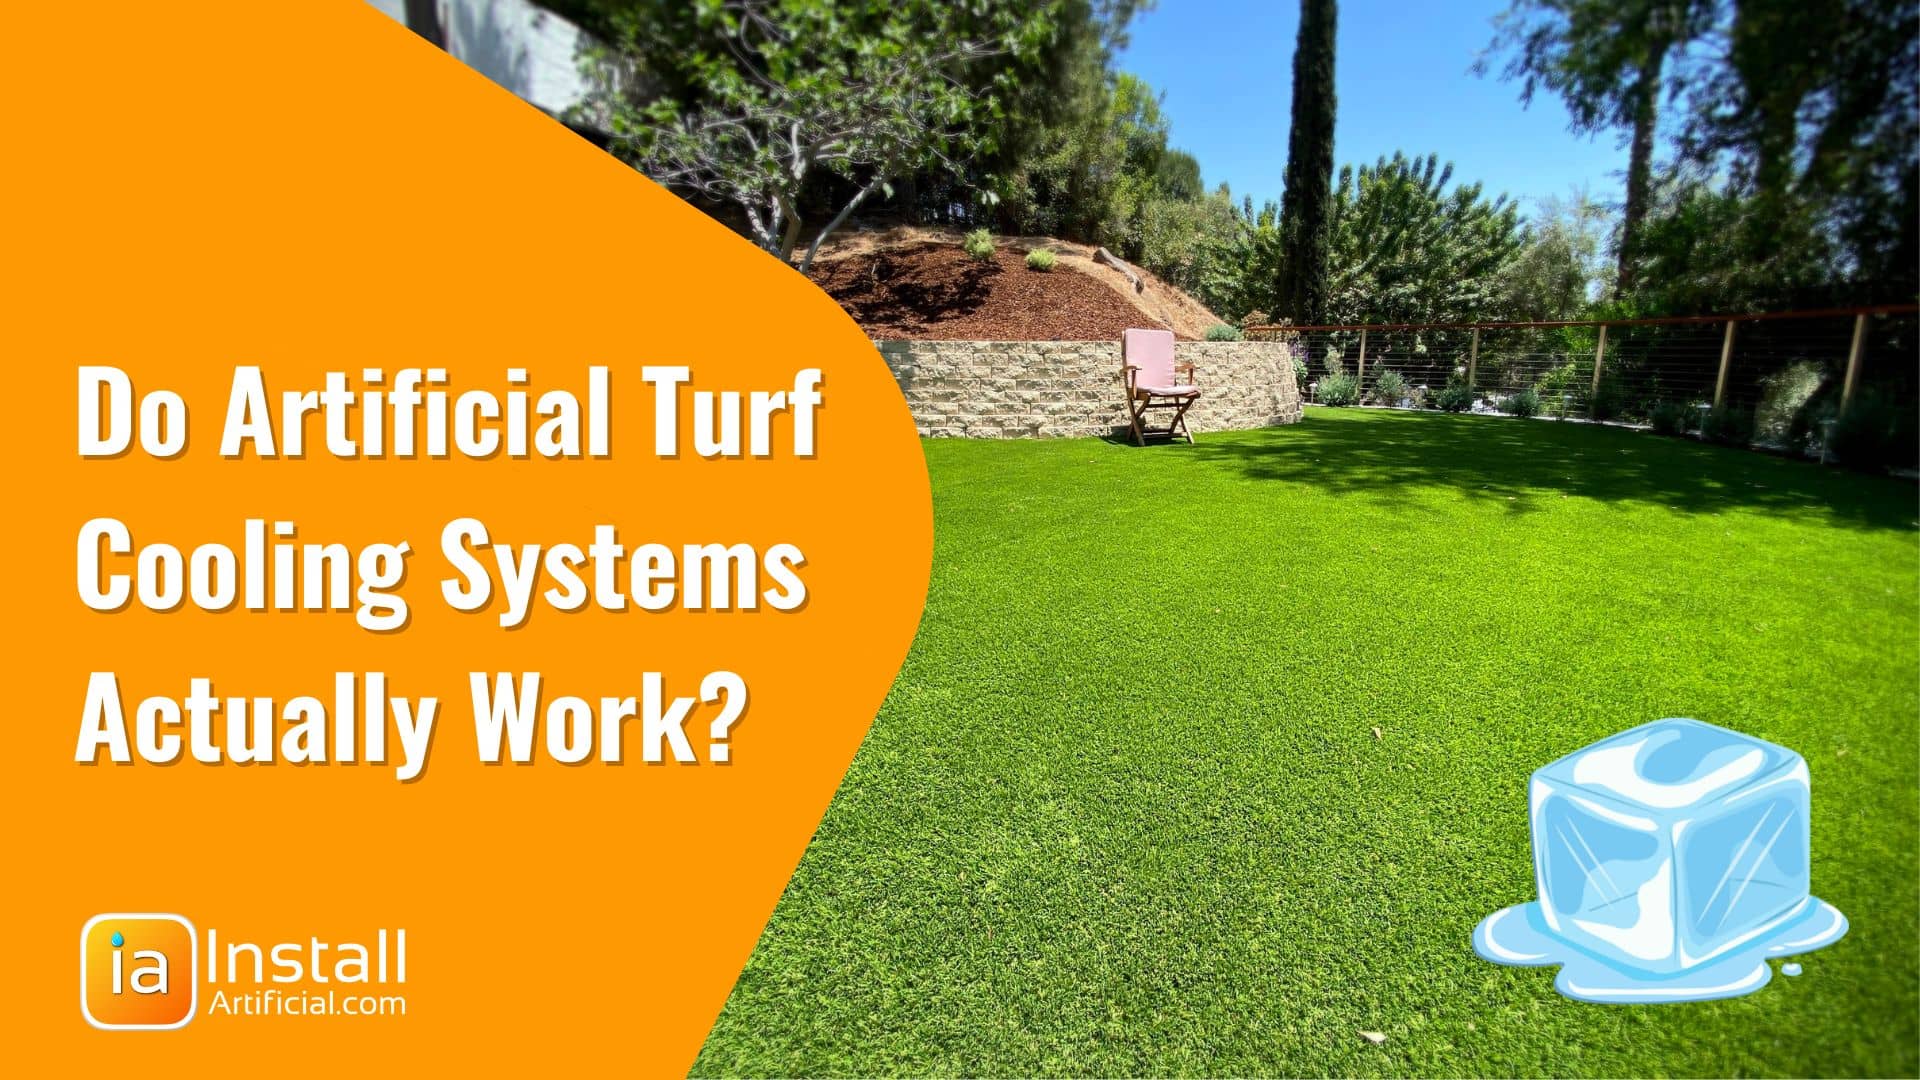 Do Artificial Turf Cooling Systems Work?